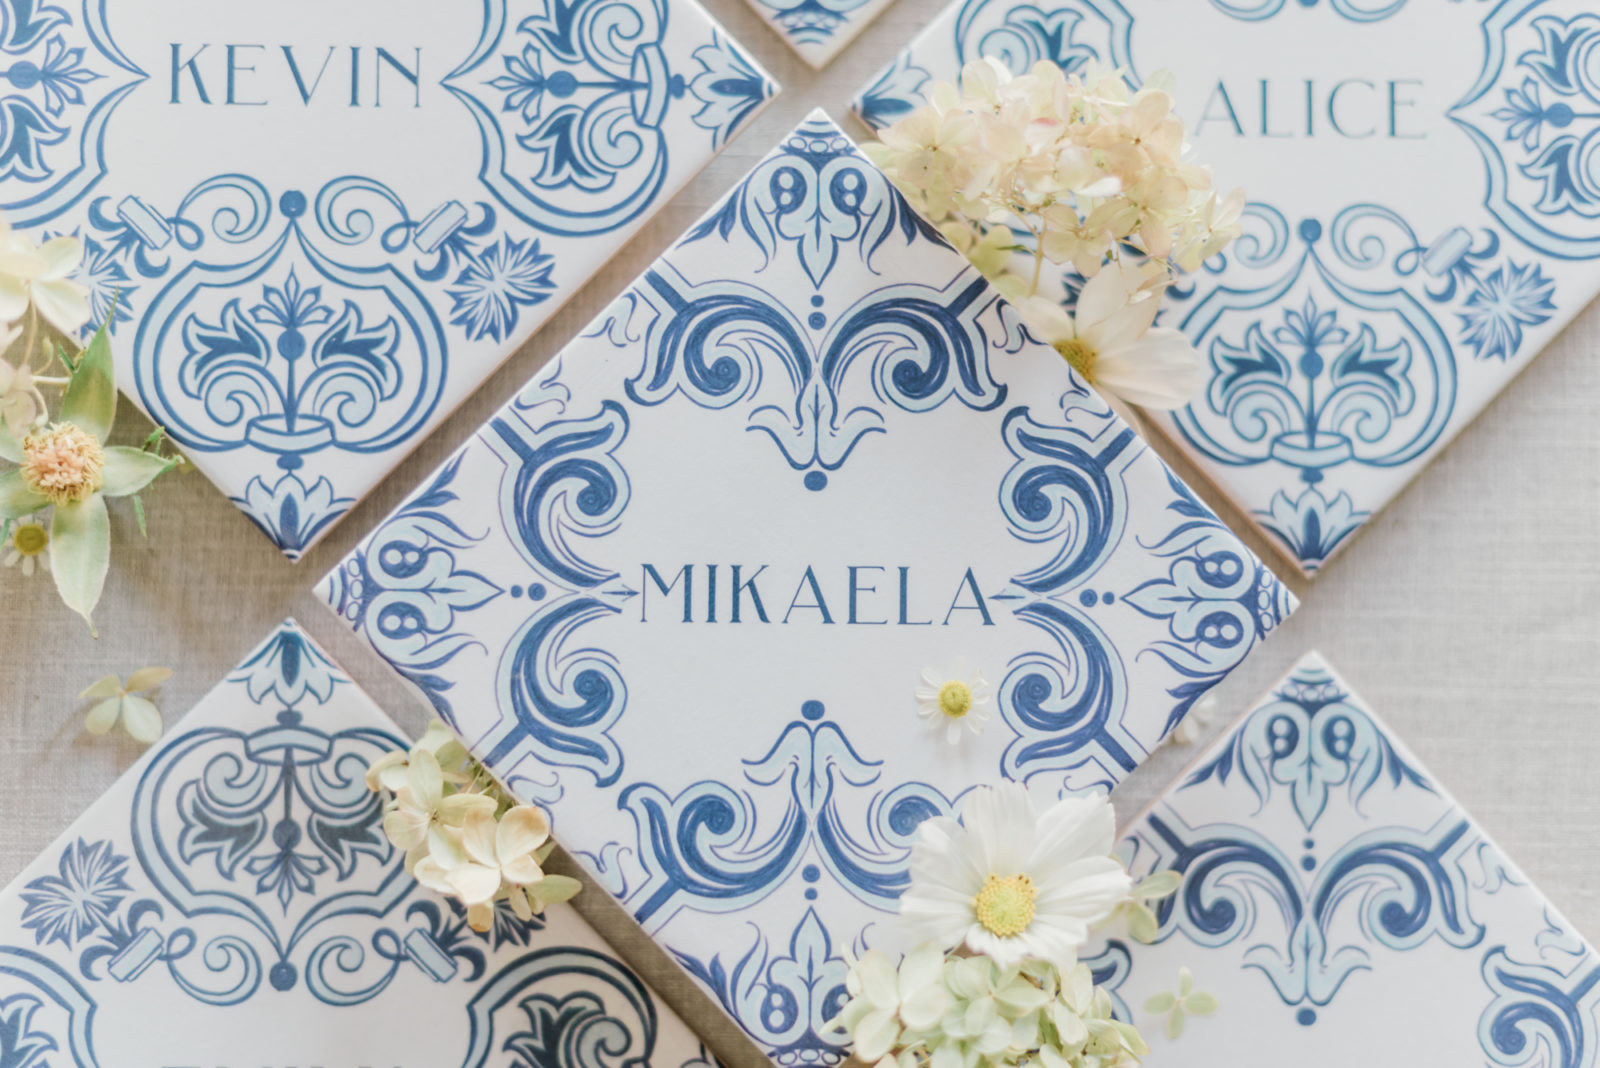 Portugal inspired wedding, blue tiles, creative seating chart